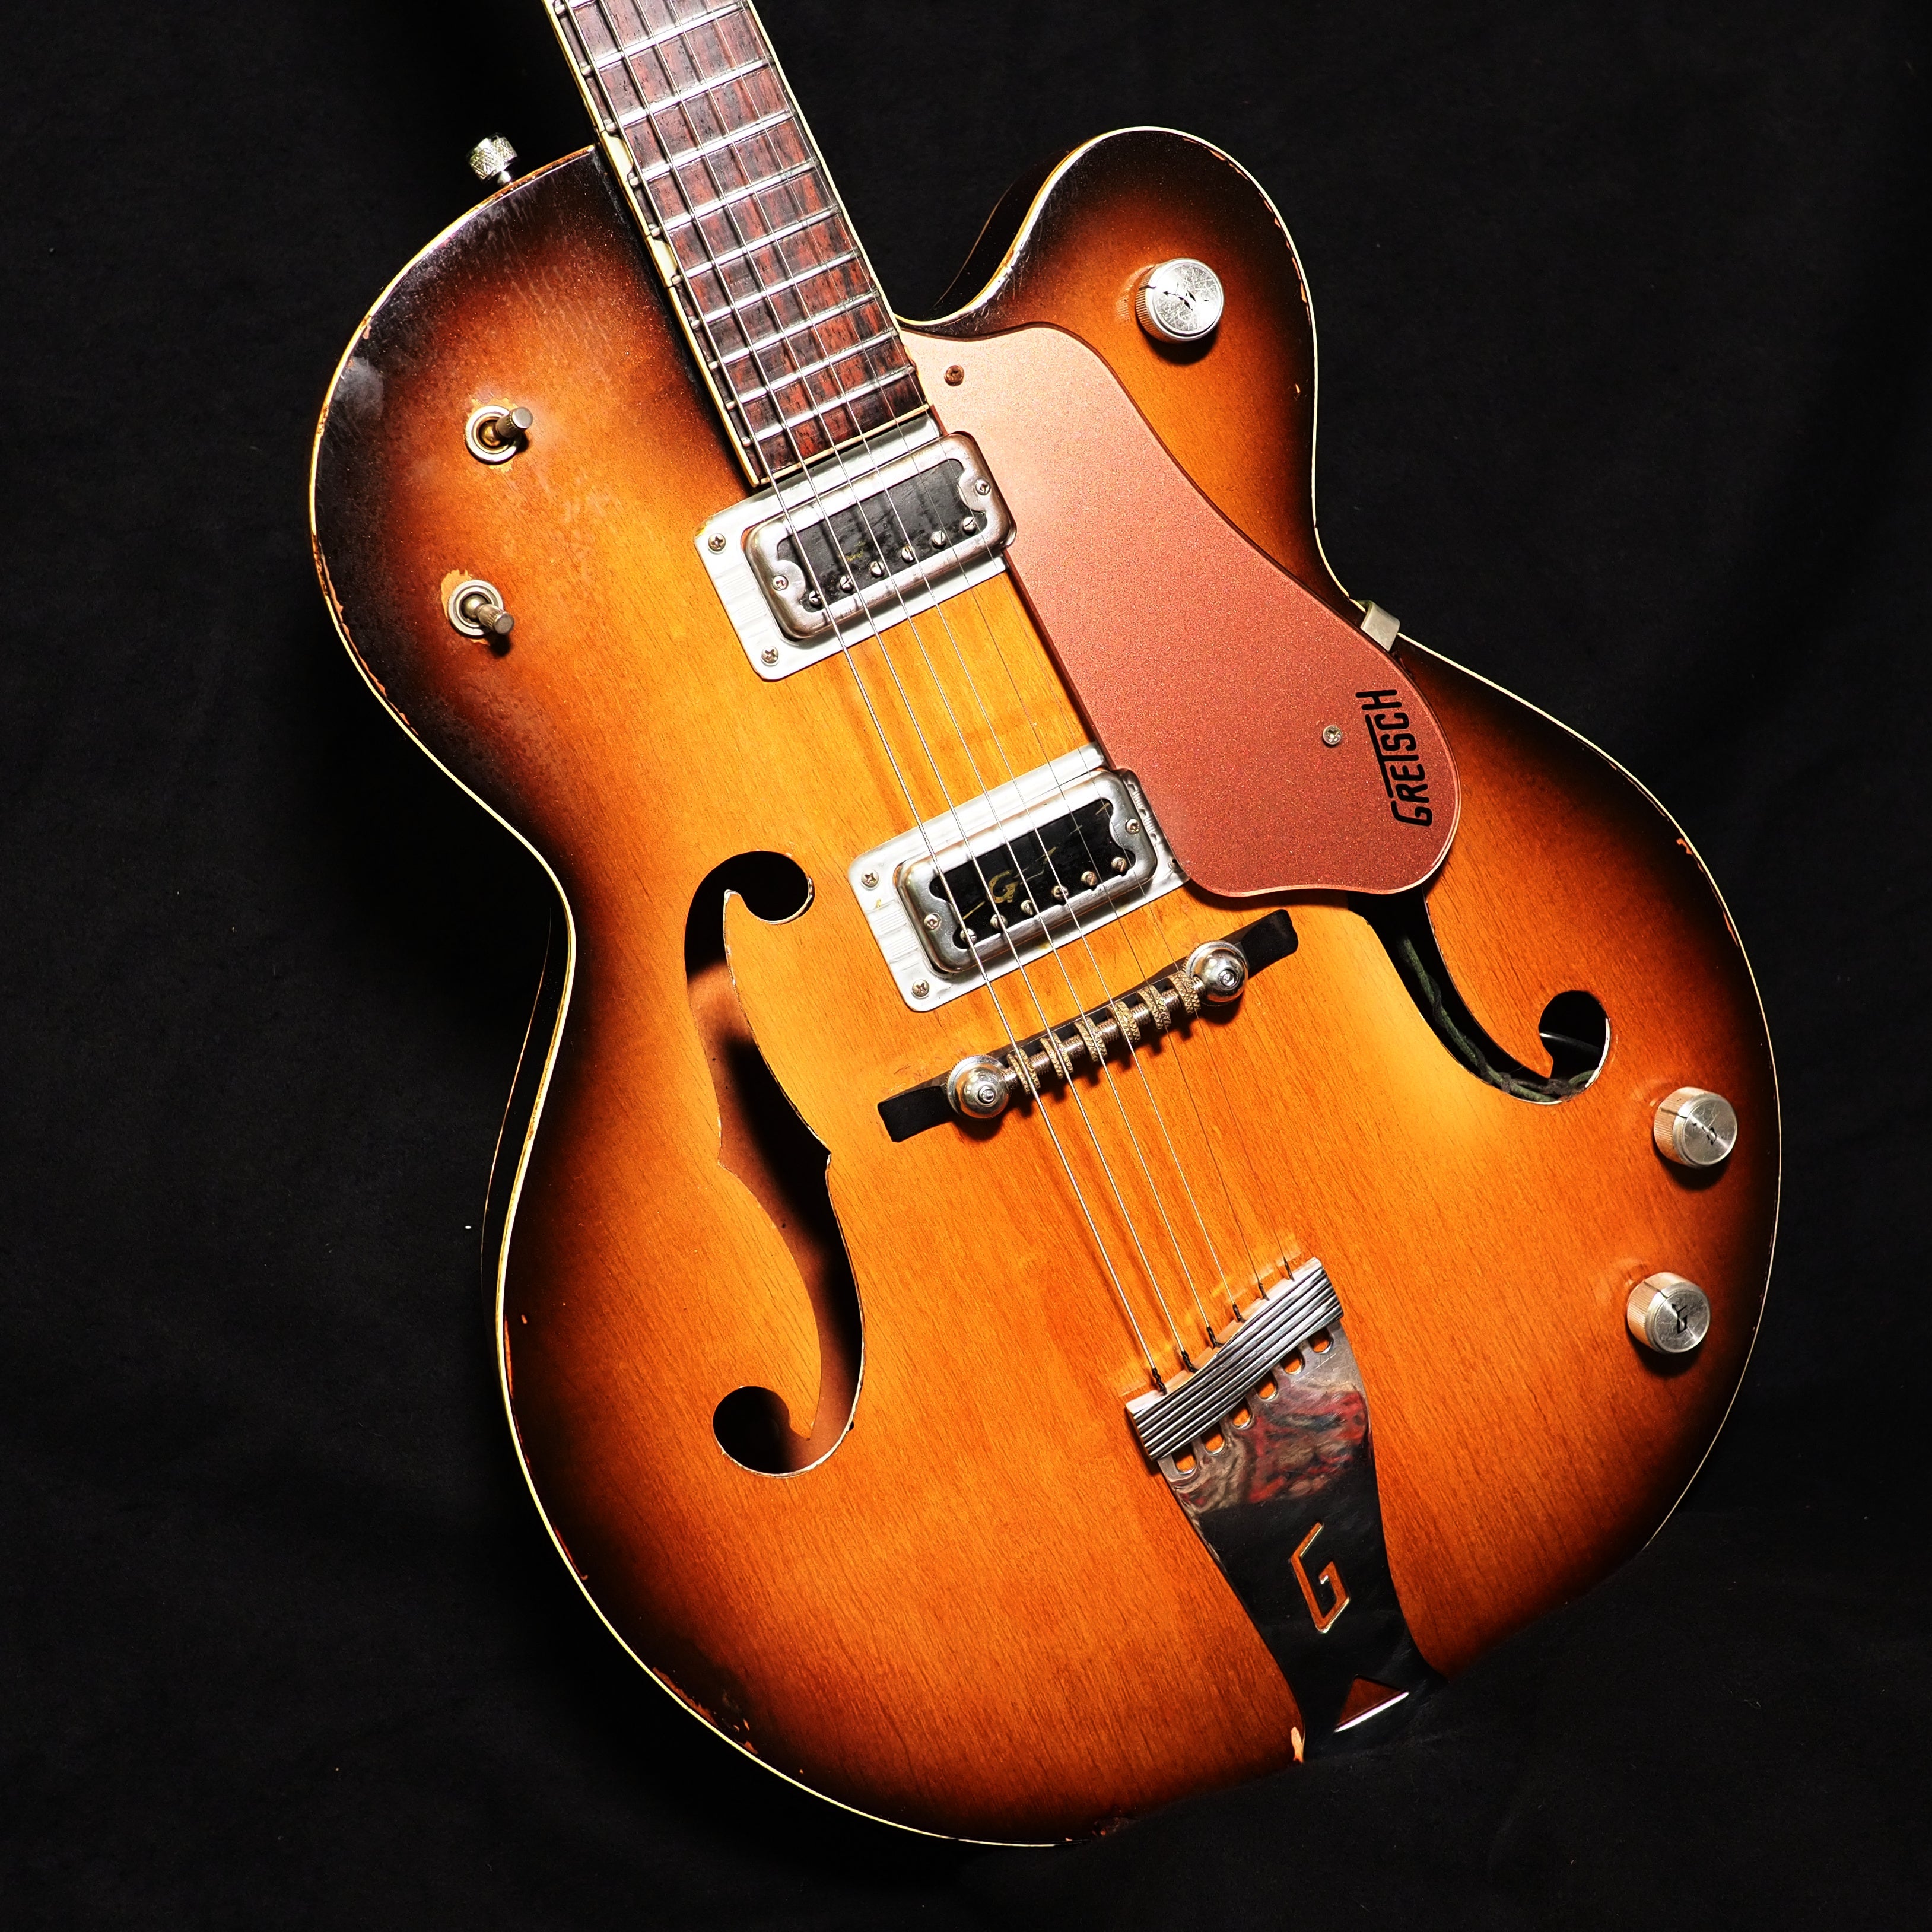 Gretsch 6117 Double Anniversary from 1968